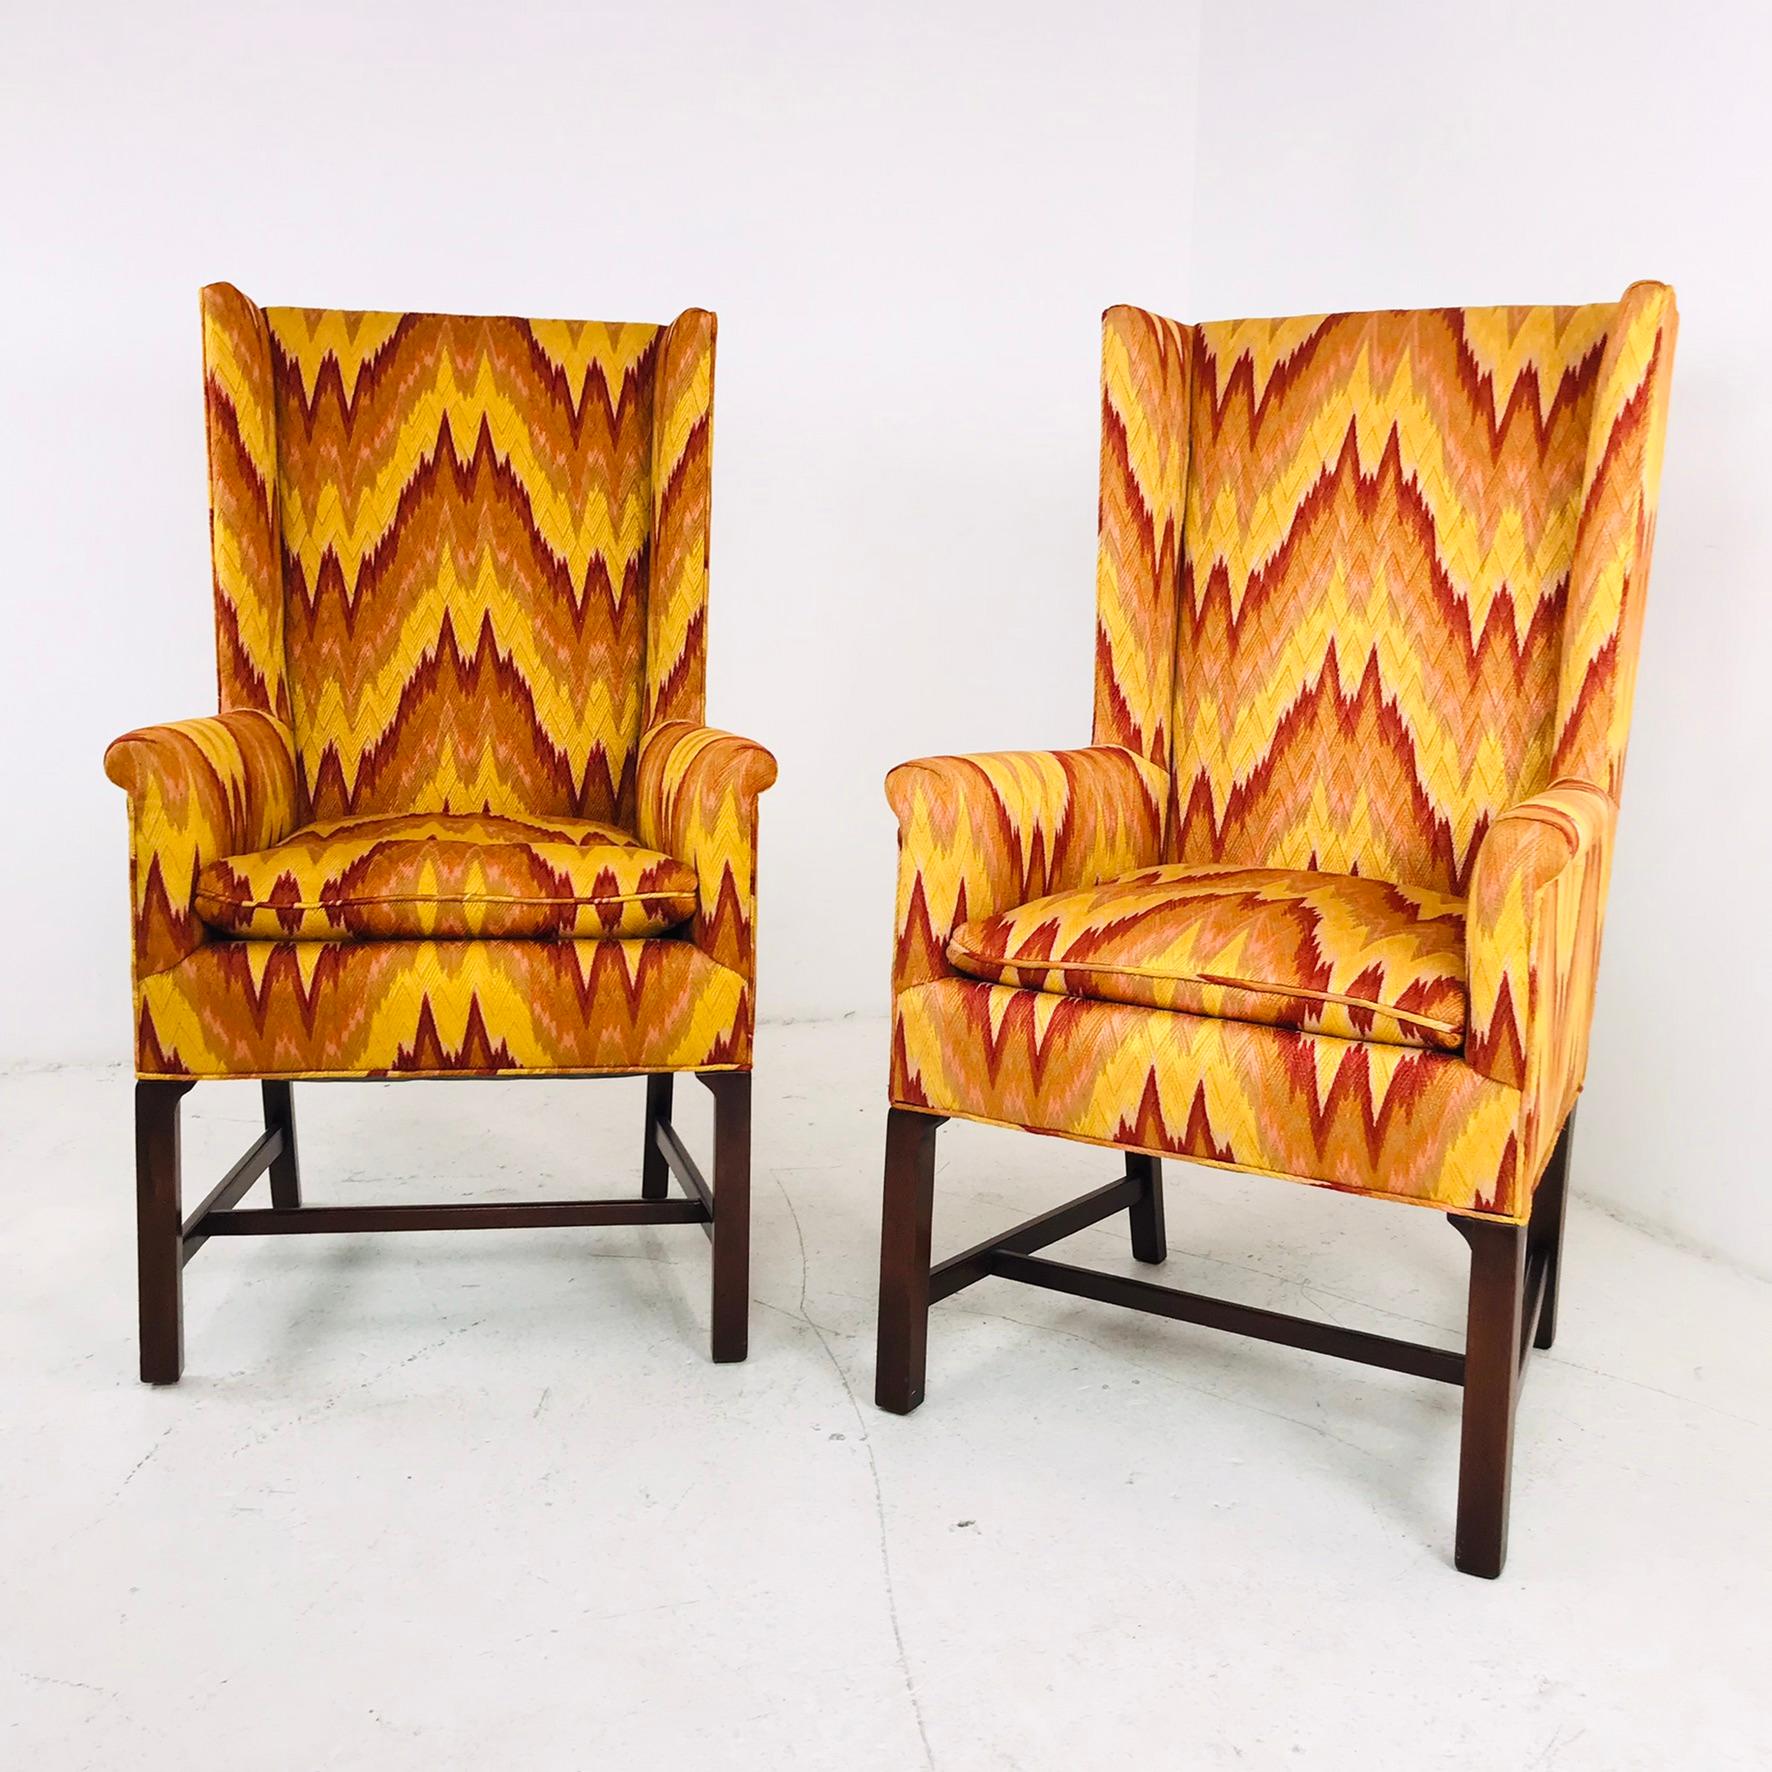 20th Century Pair of Flame Stitch High Back Square Wing Chairs For Sale